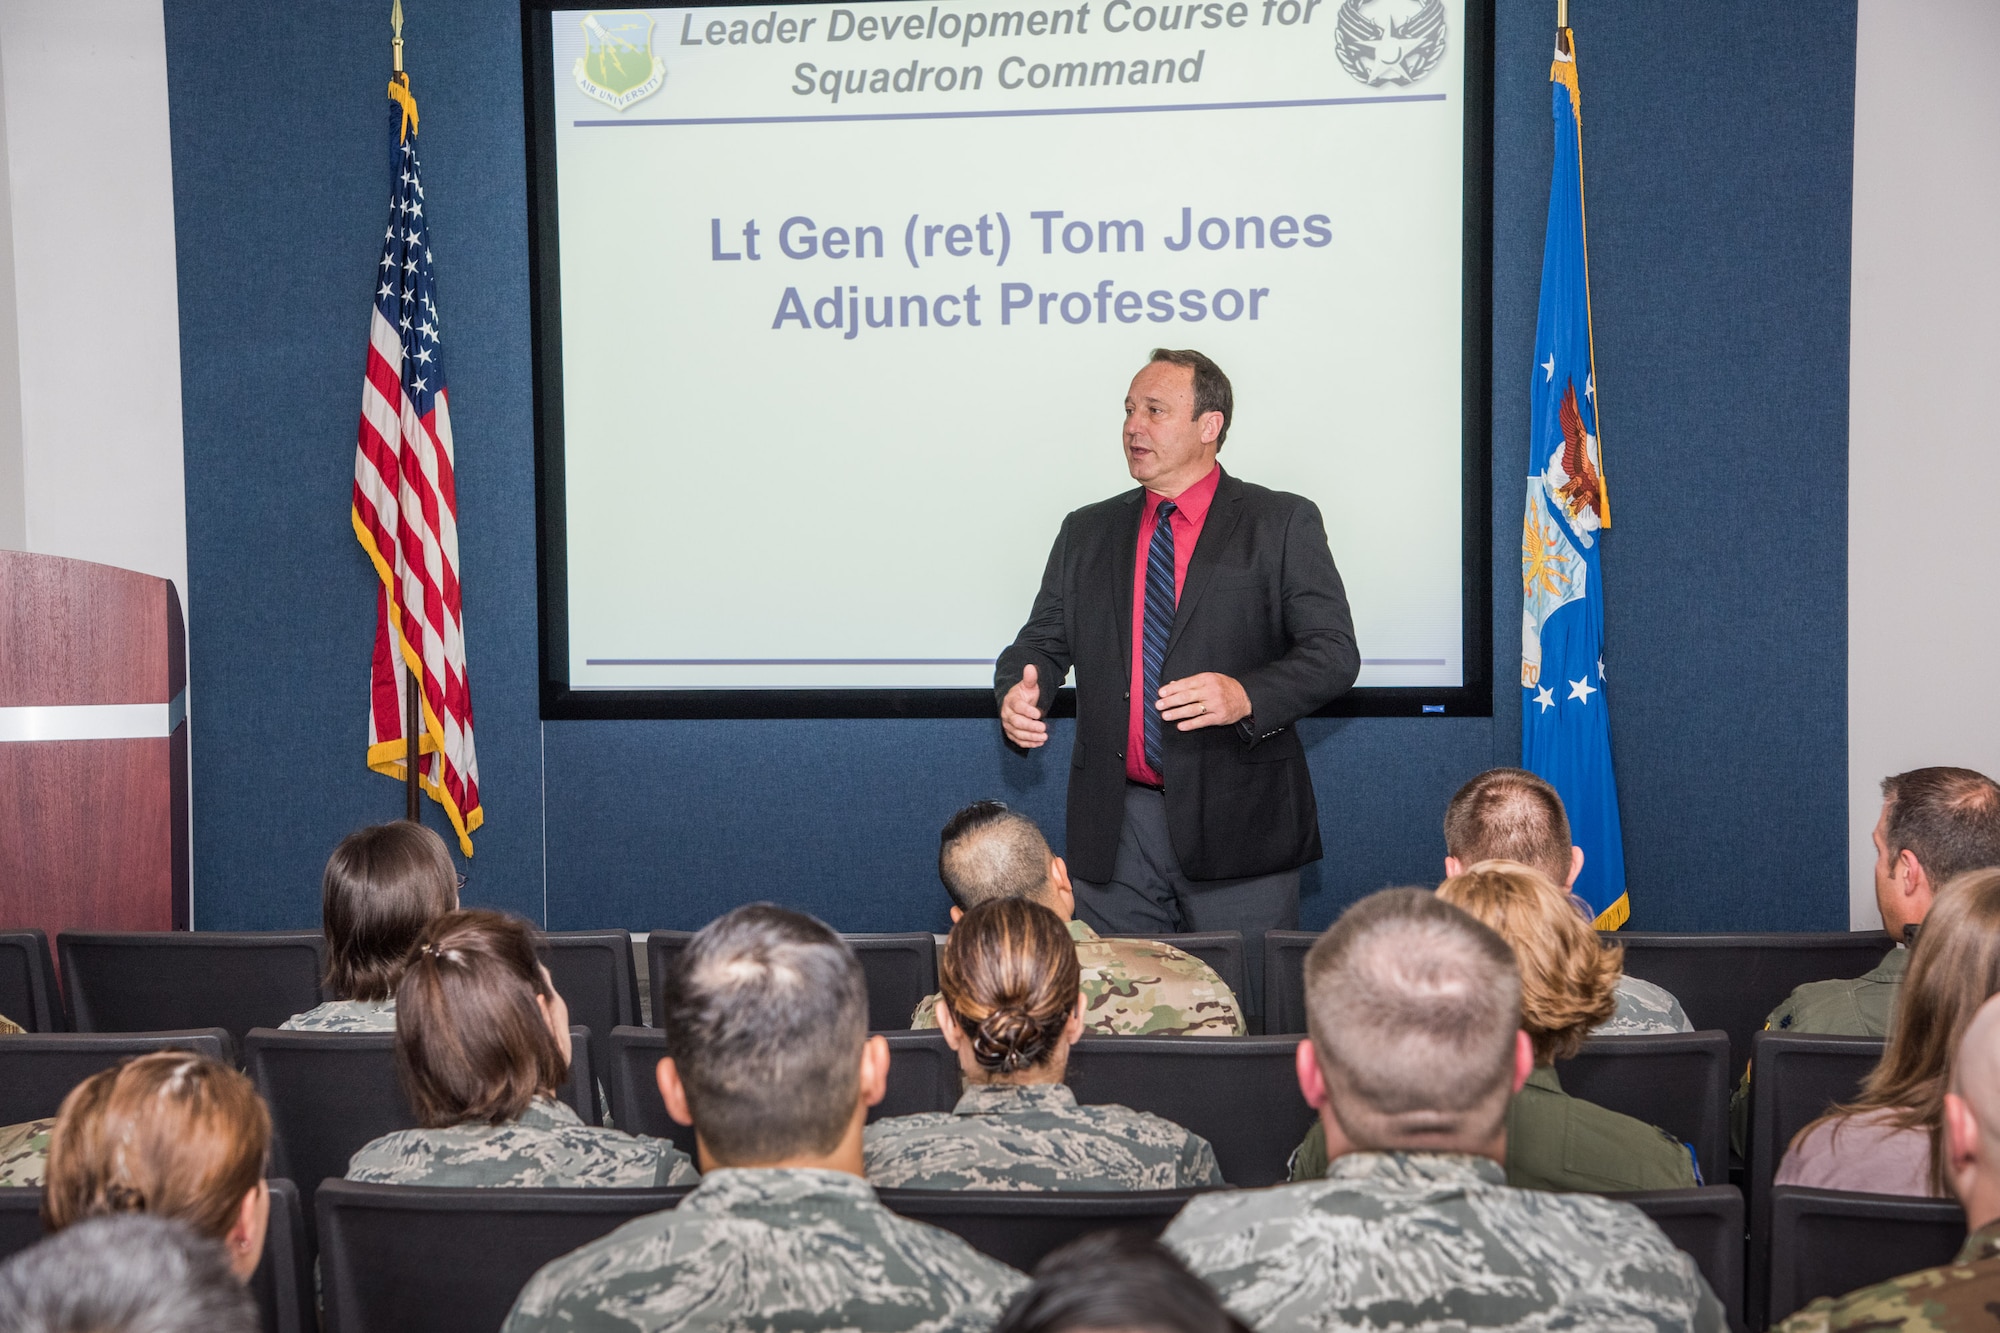 Retired Lt. Gen. Tom Jones, a former vice commander of U.S. Air Forces in Europe-Air Forces Africa, welcomes students to the Leader Development Course for Squadron Command class, Oct. 30, 2018, at Air University, Maxwell Air Force Base, Alabama. Jones provided one of several senior leader perspectives, facilitating discussions about leadership with the students during the eight-day course. (U.S. Air Force photo by William Birchfield)